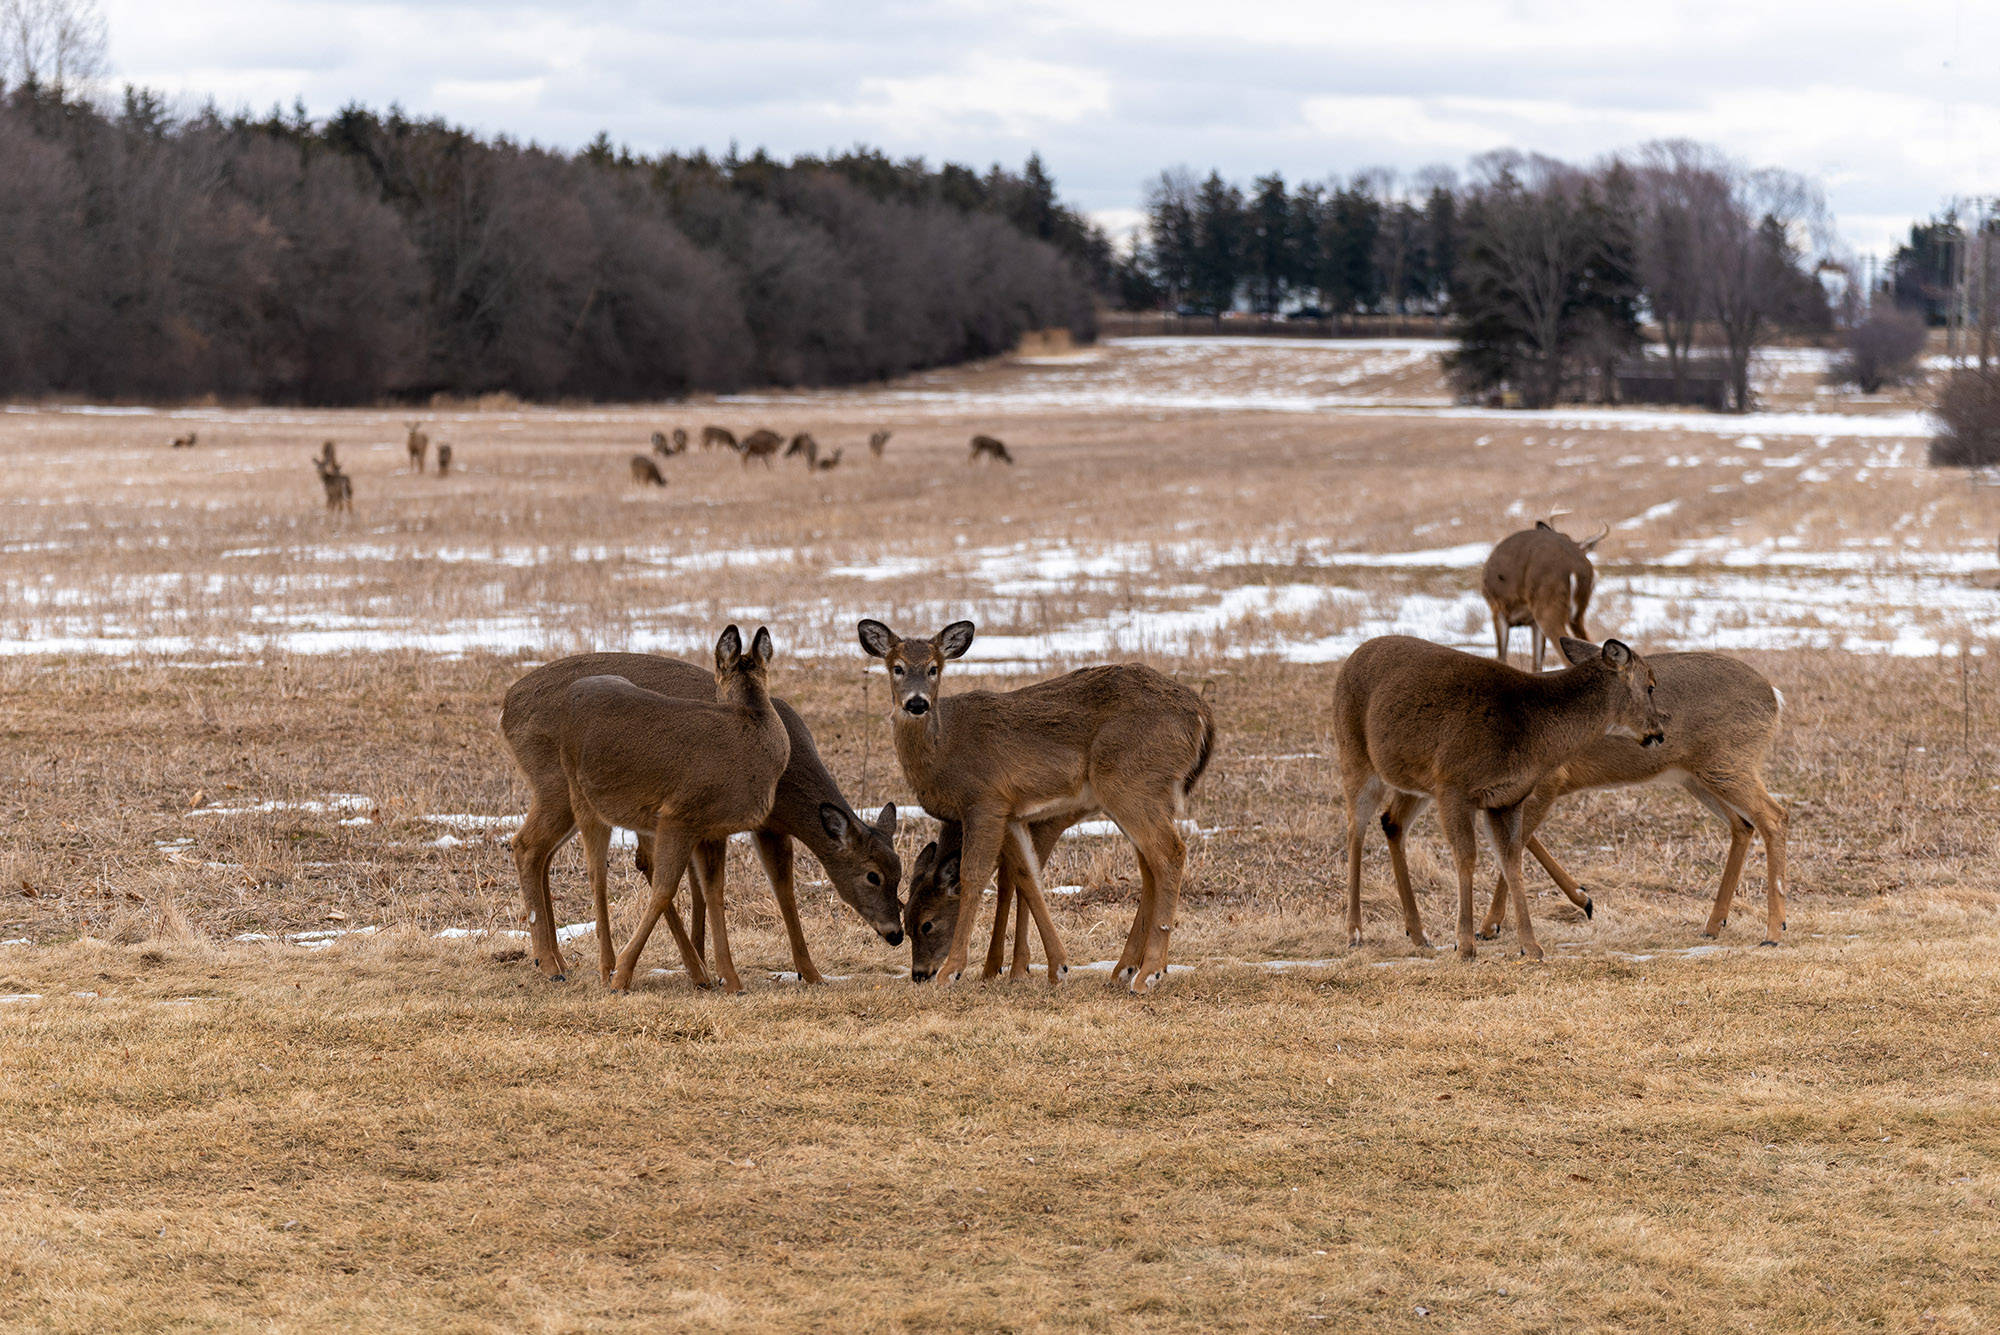 Researchers are leaving vaccine treat balls in ag fields for deer.